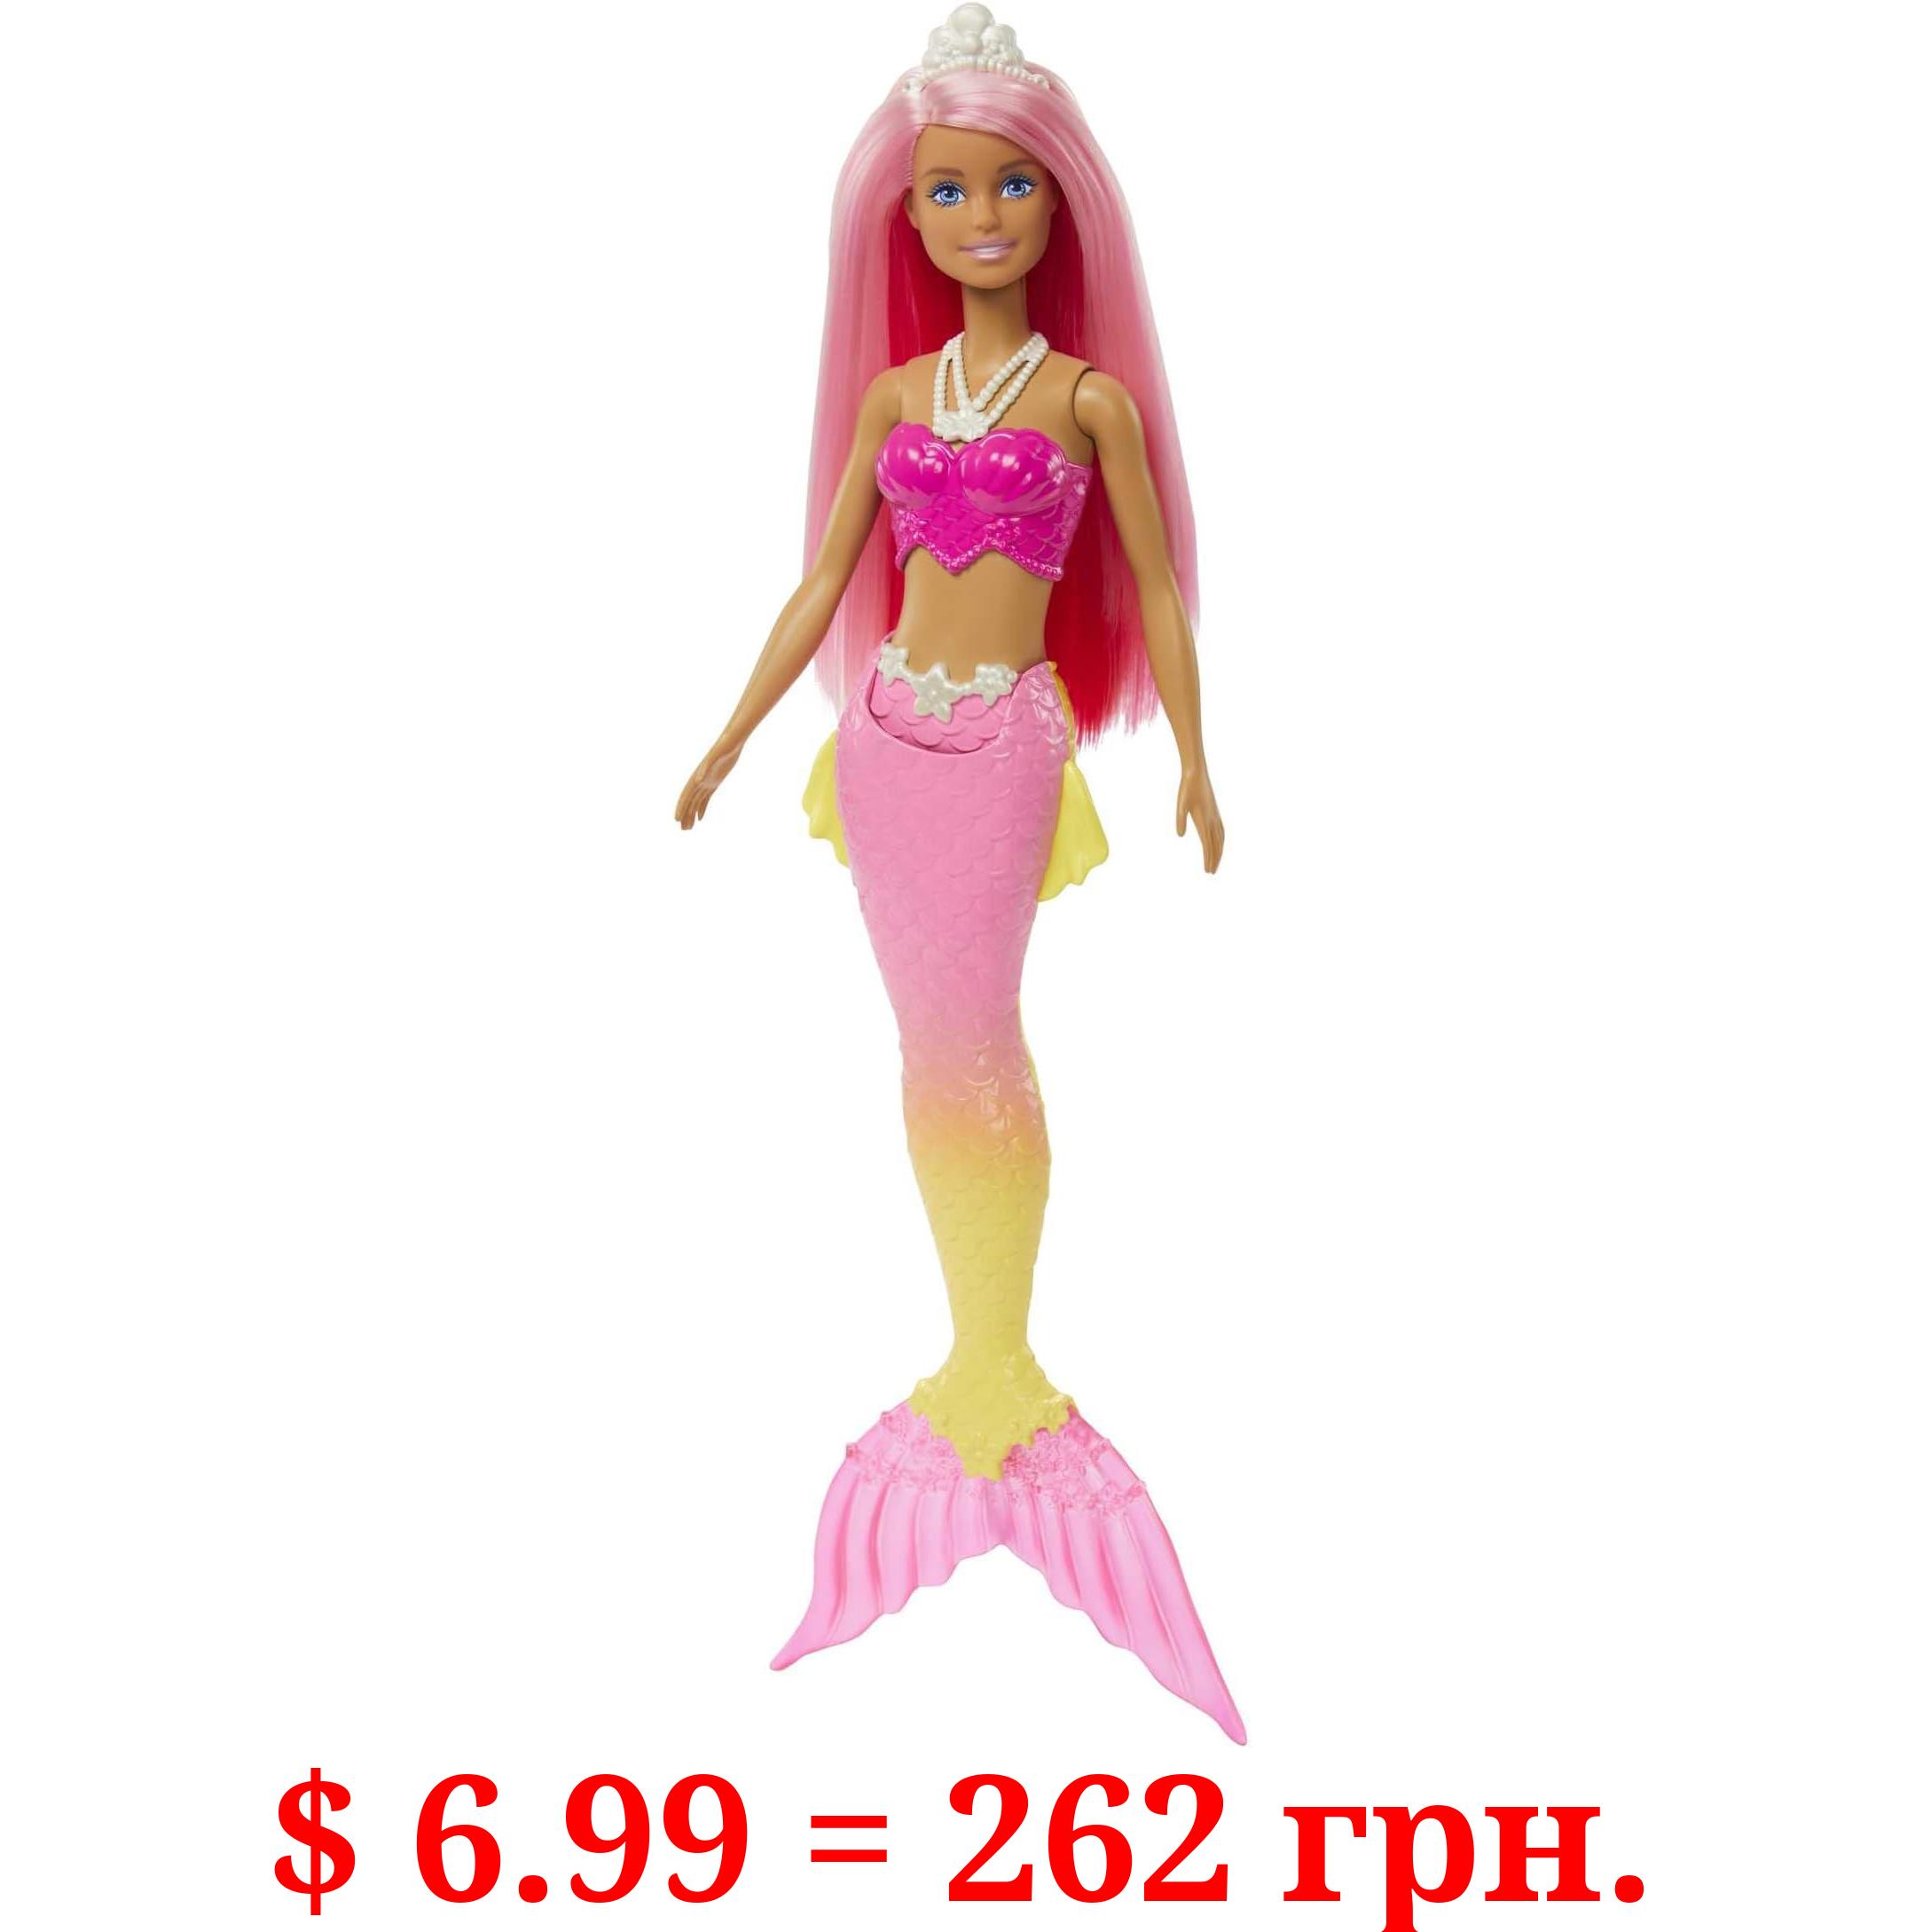 Barbie Dreamtopia Mermaid Doll, Pink Hair, Pink & Yellow Ombre Tail & Tiara Accessory